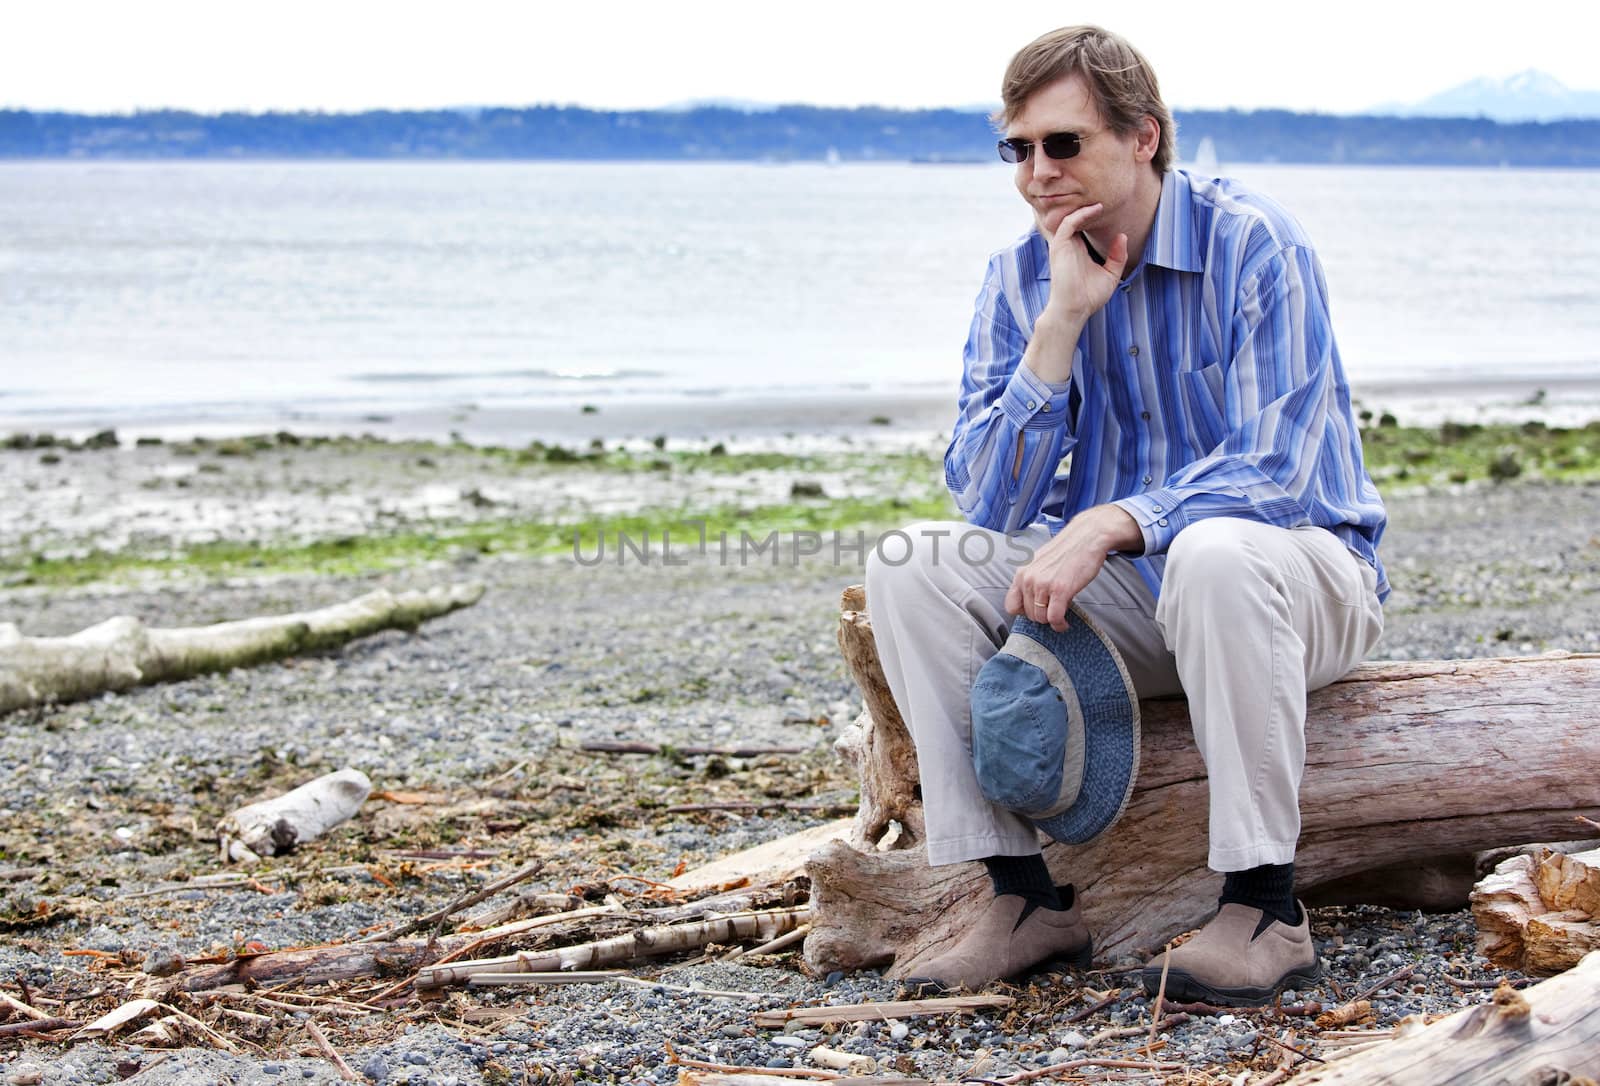 Depressed, sad Caucasian  man in forties sitting on driftwood on beach, chin in hand